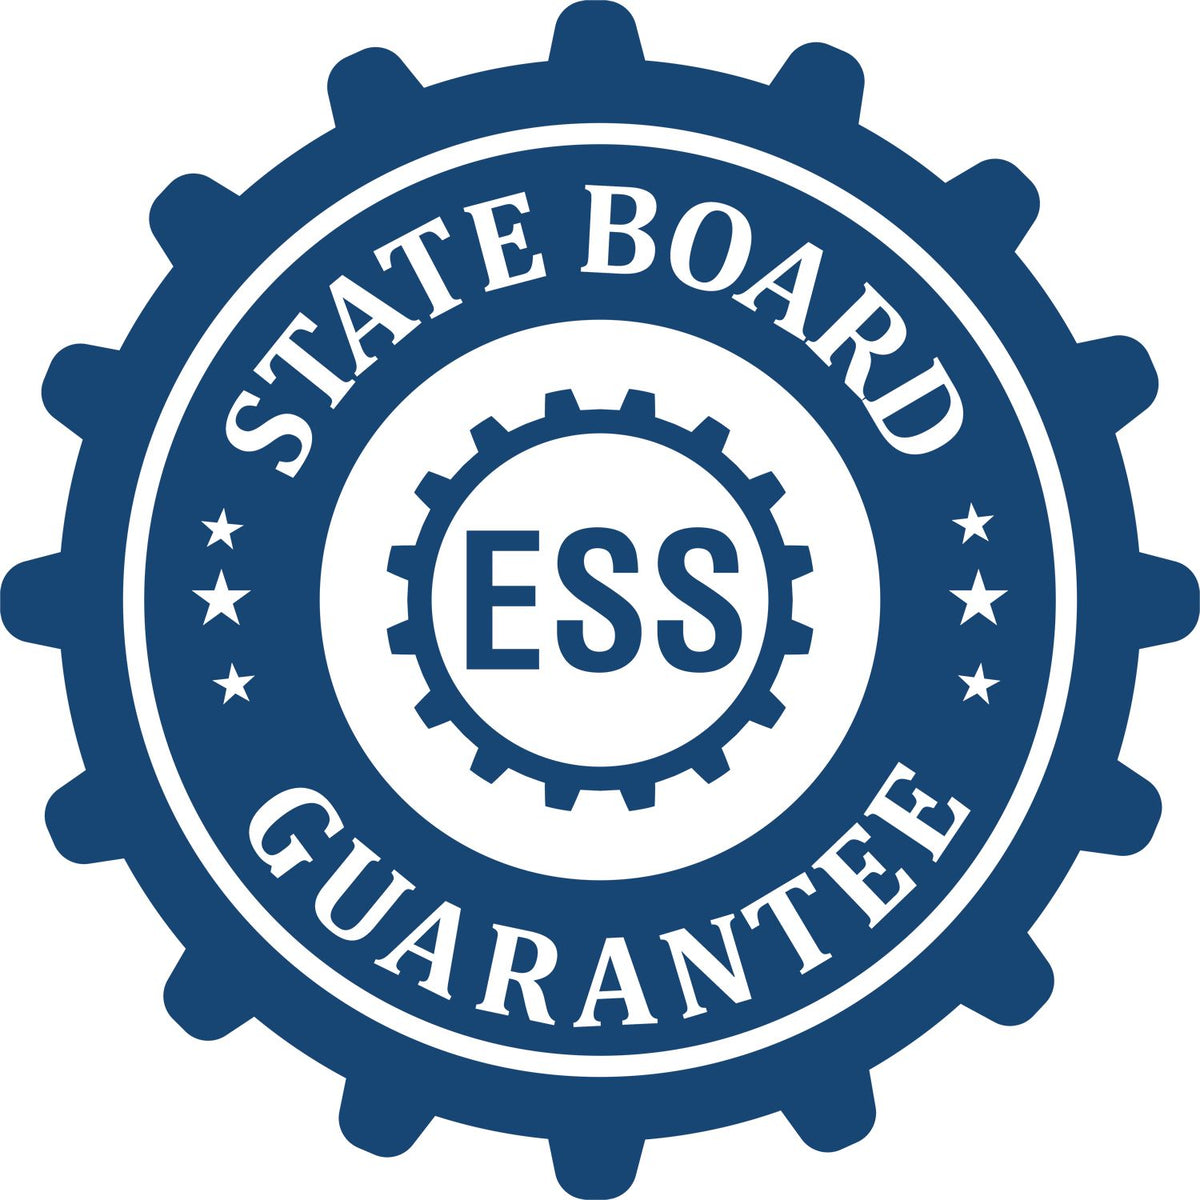 An emblem in a gear shape illustrating a state board guarantee for the Digital Massachusetts Landscape Architect Stamp product.